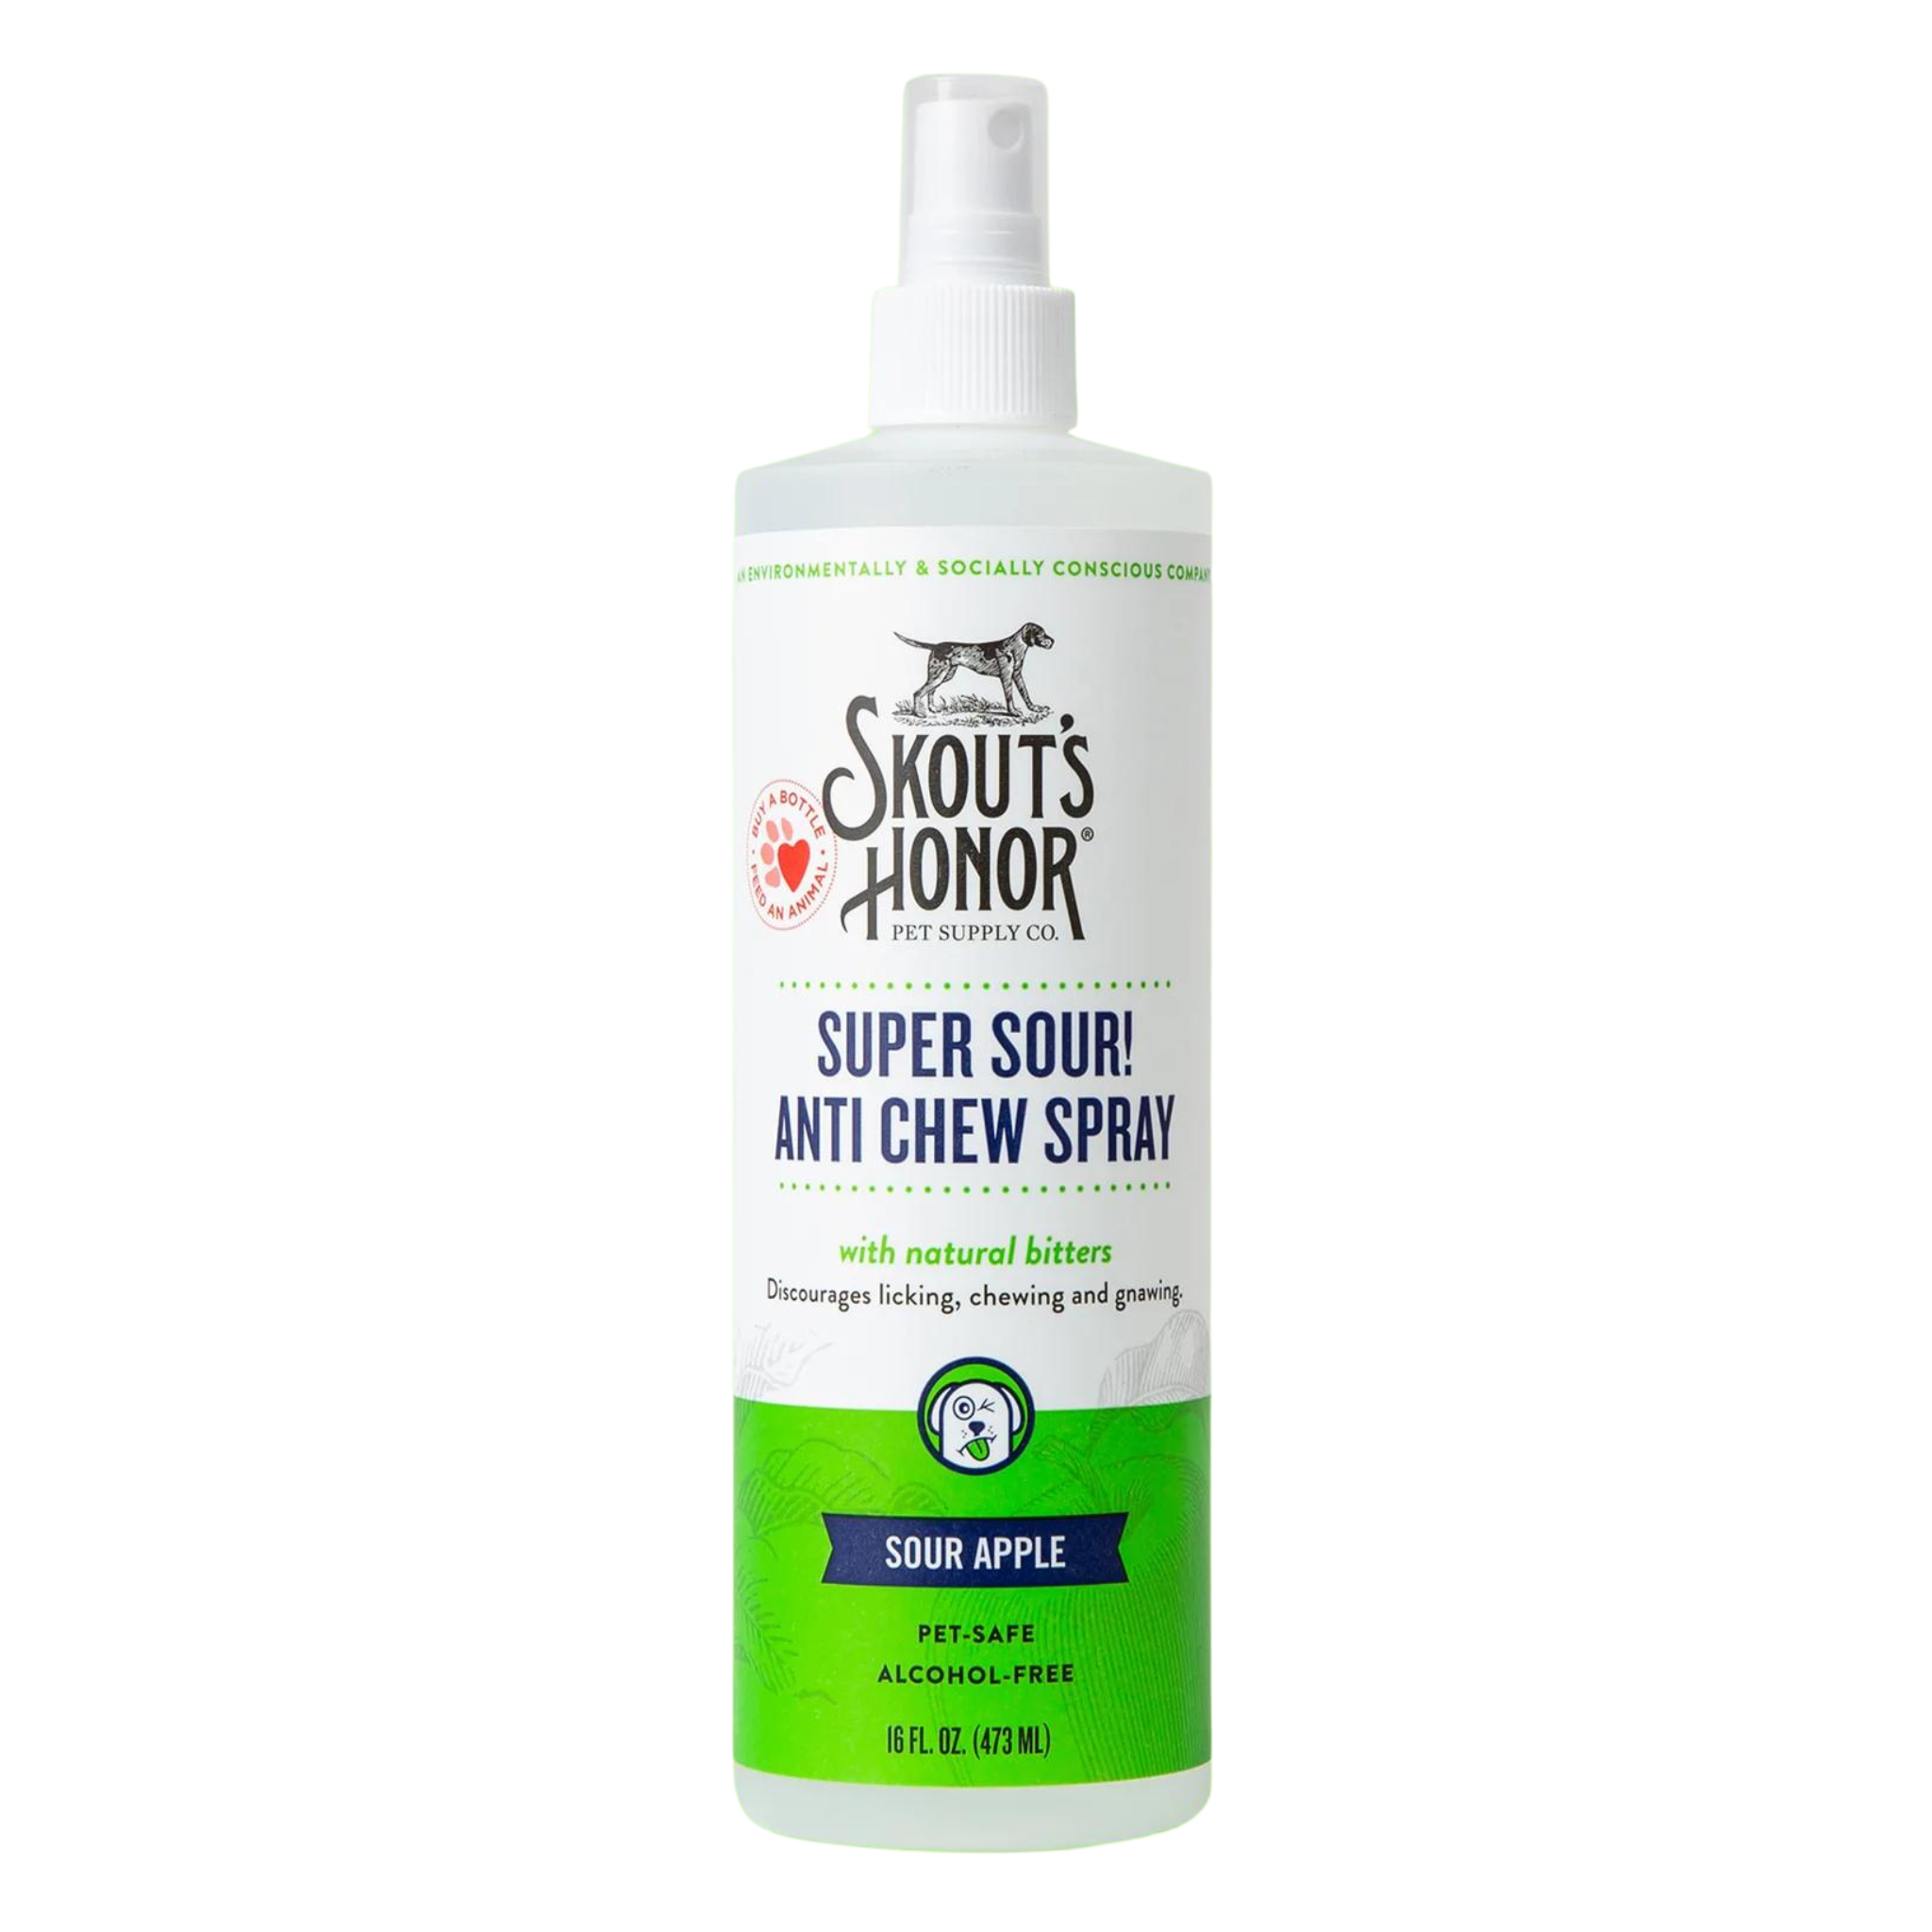 Skout's Honor Super Sour! Anti-Chew Spray for Dogs - Mutts & Co.